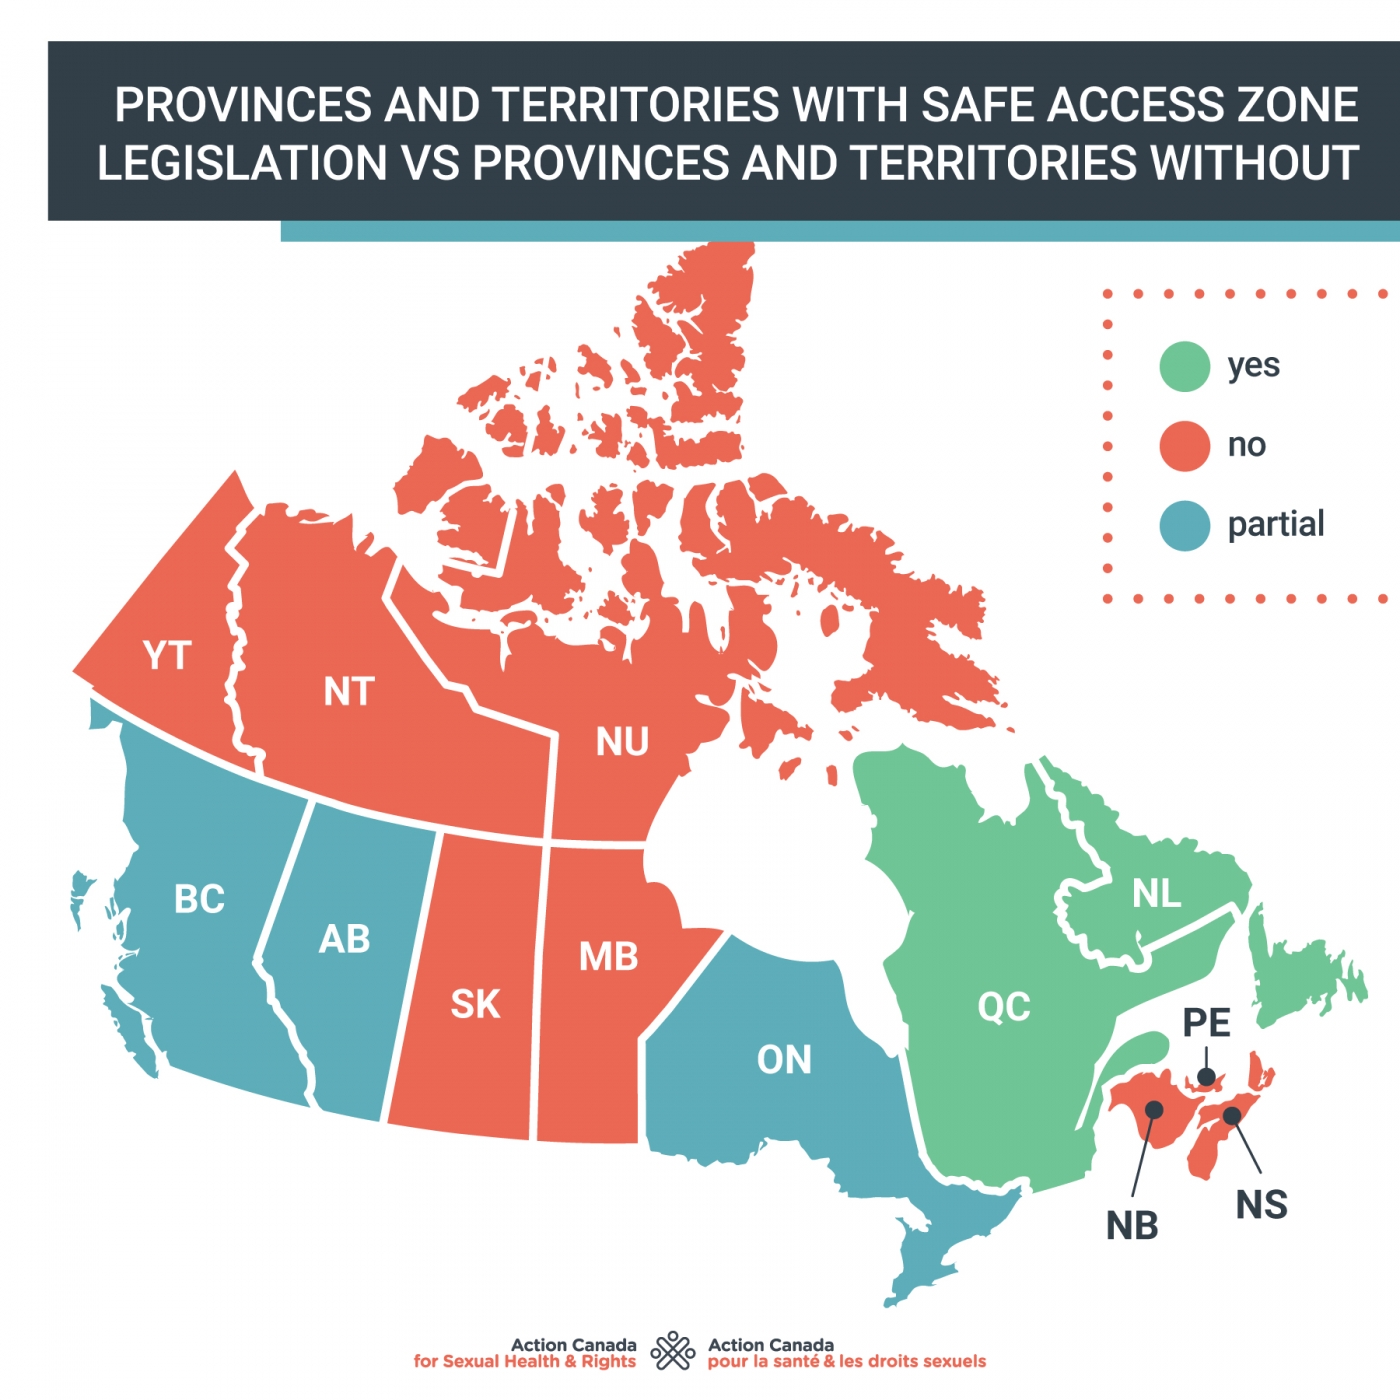 Chart of Provinces and territories with safe access zone legislation vs those without